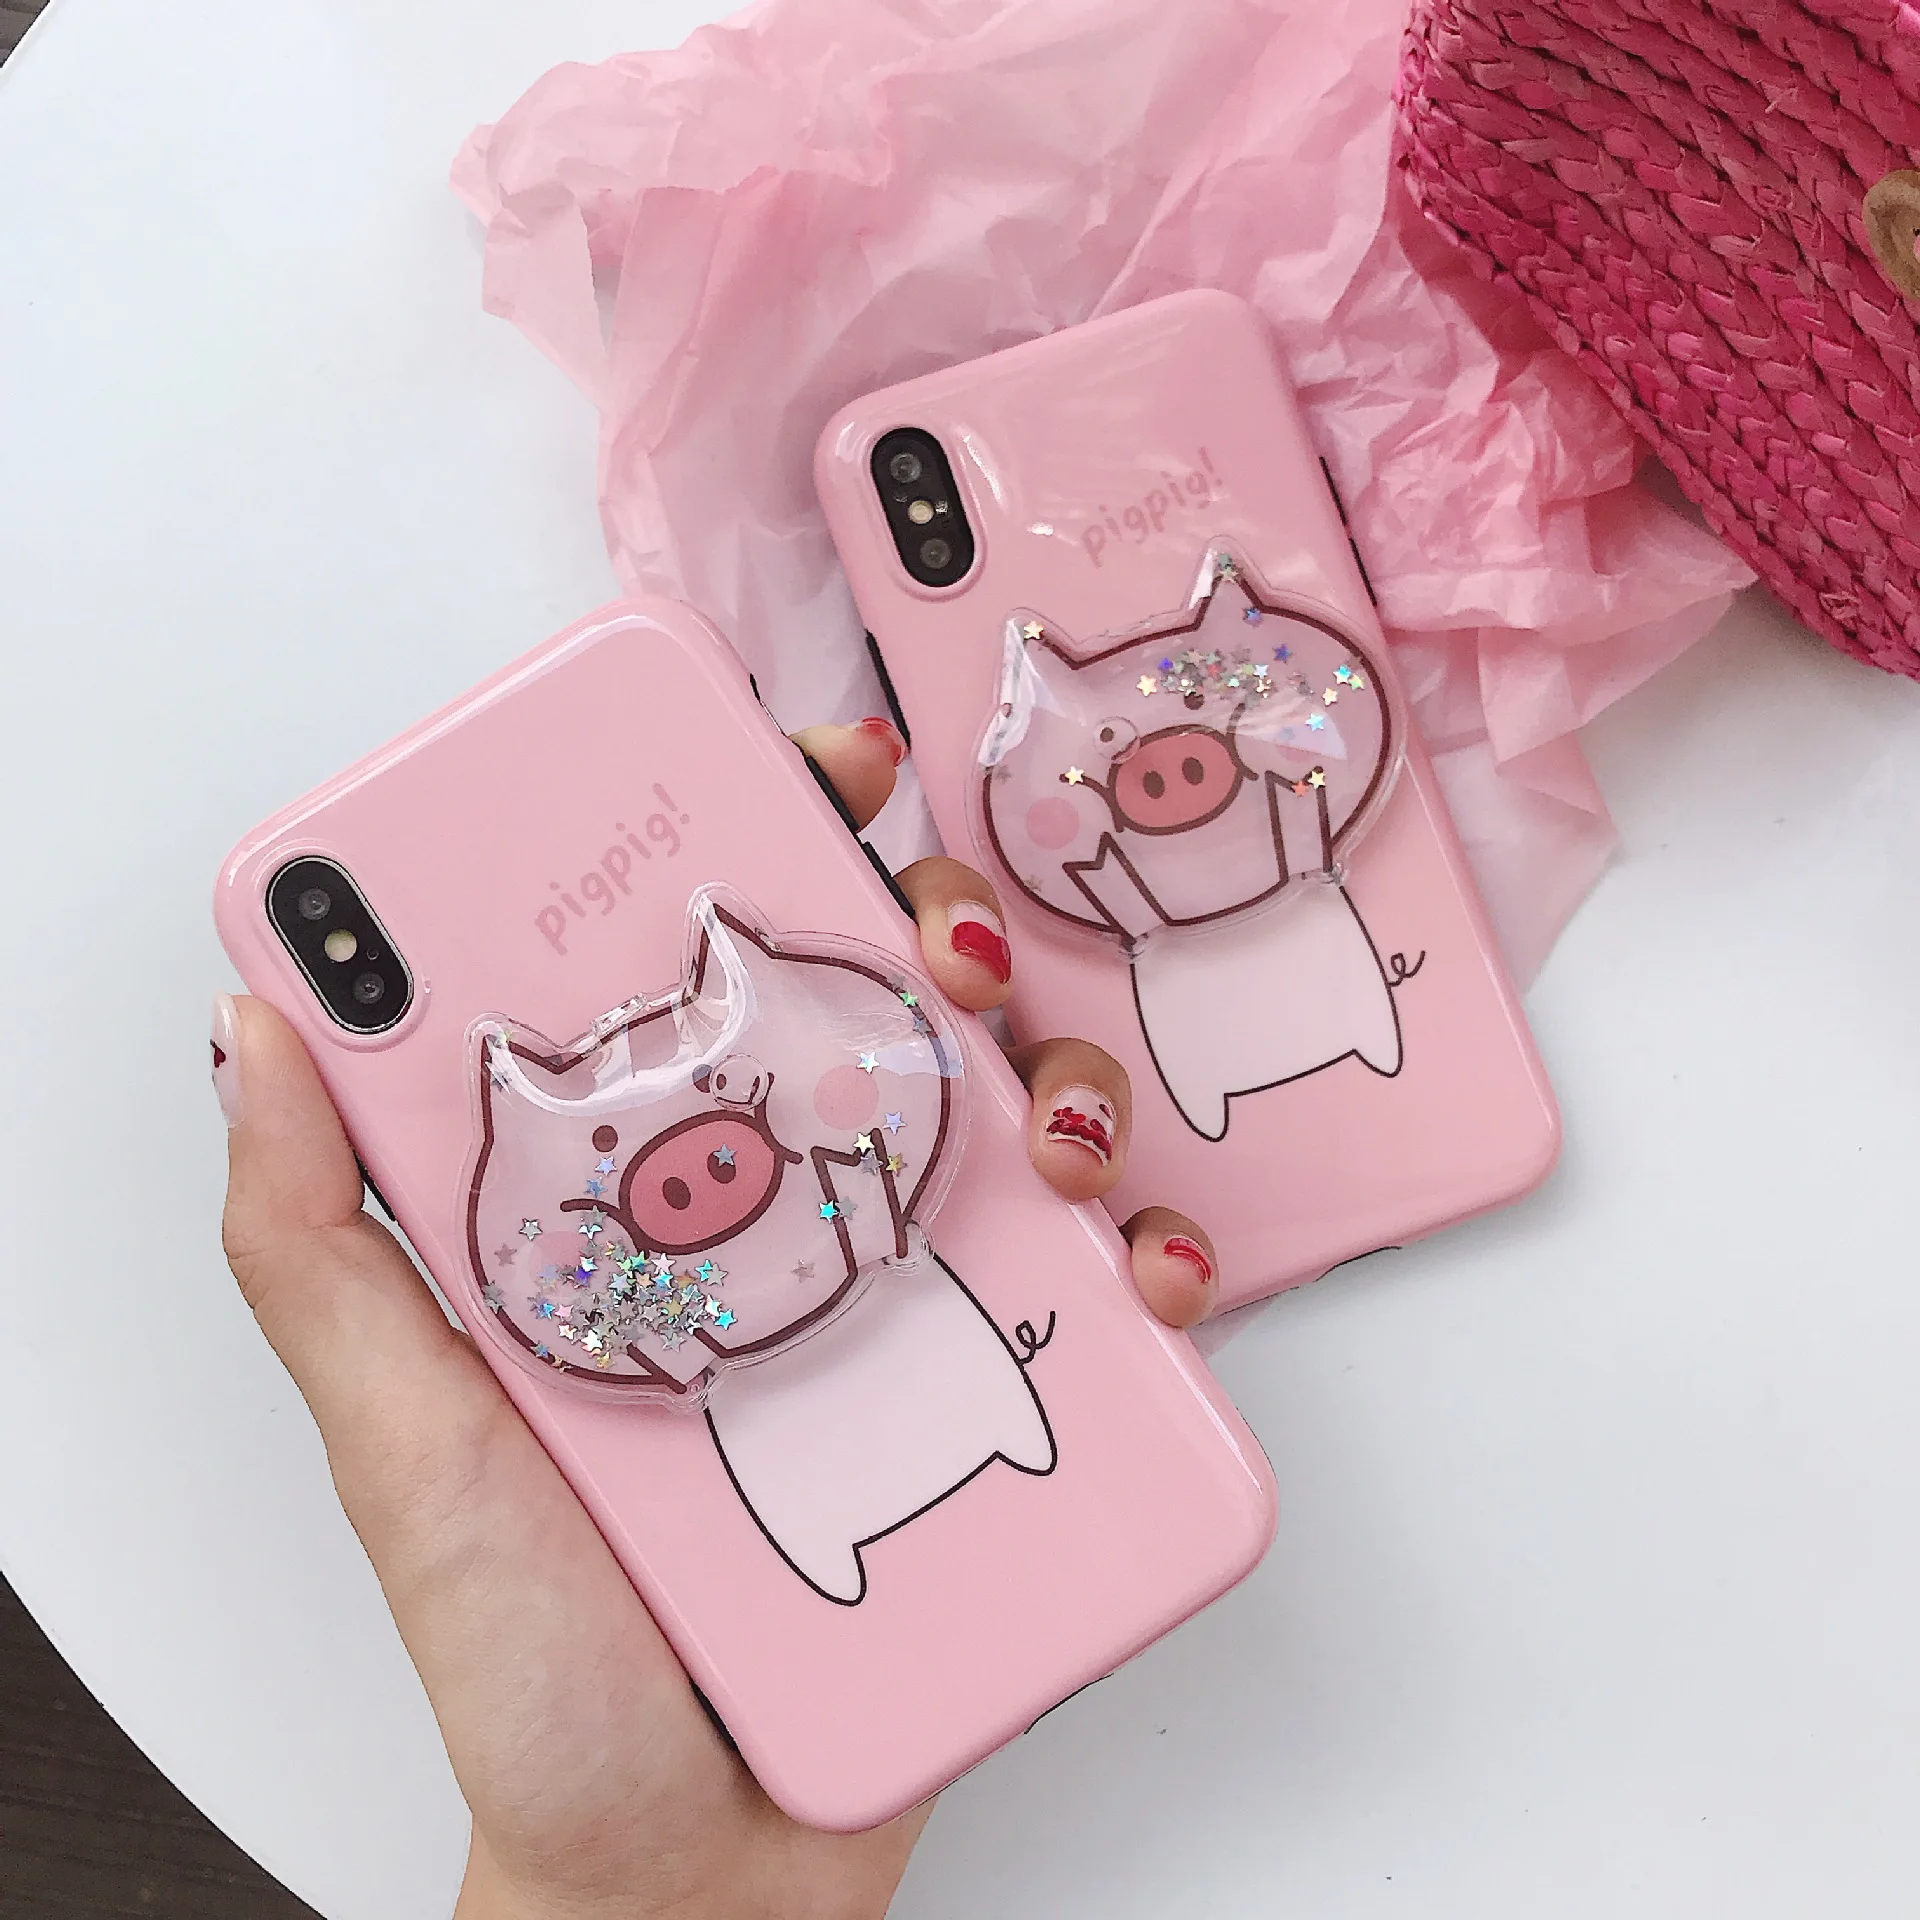 

Cute Cartoon Pig Quicksand Squishy phone Cases for iphone X XR XS XS Max Dynamic Liquid Glitter Case For iphone 6 6s 7 8 plus